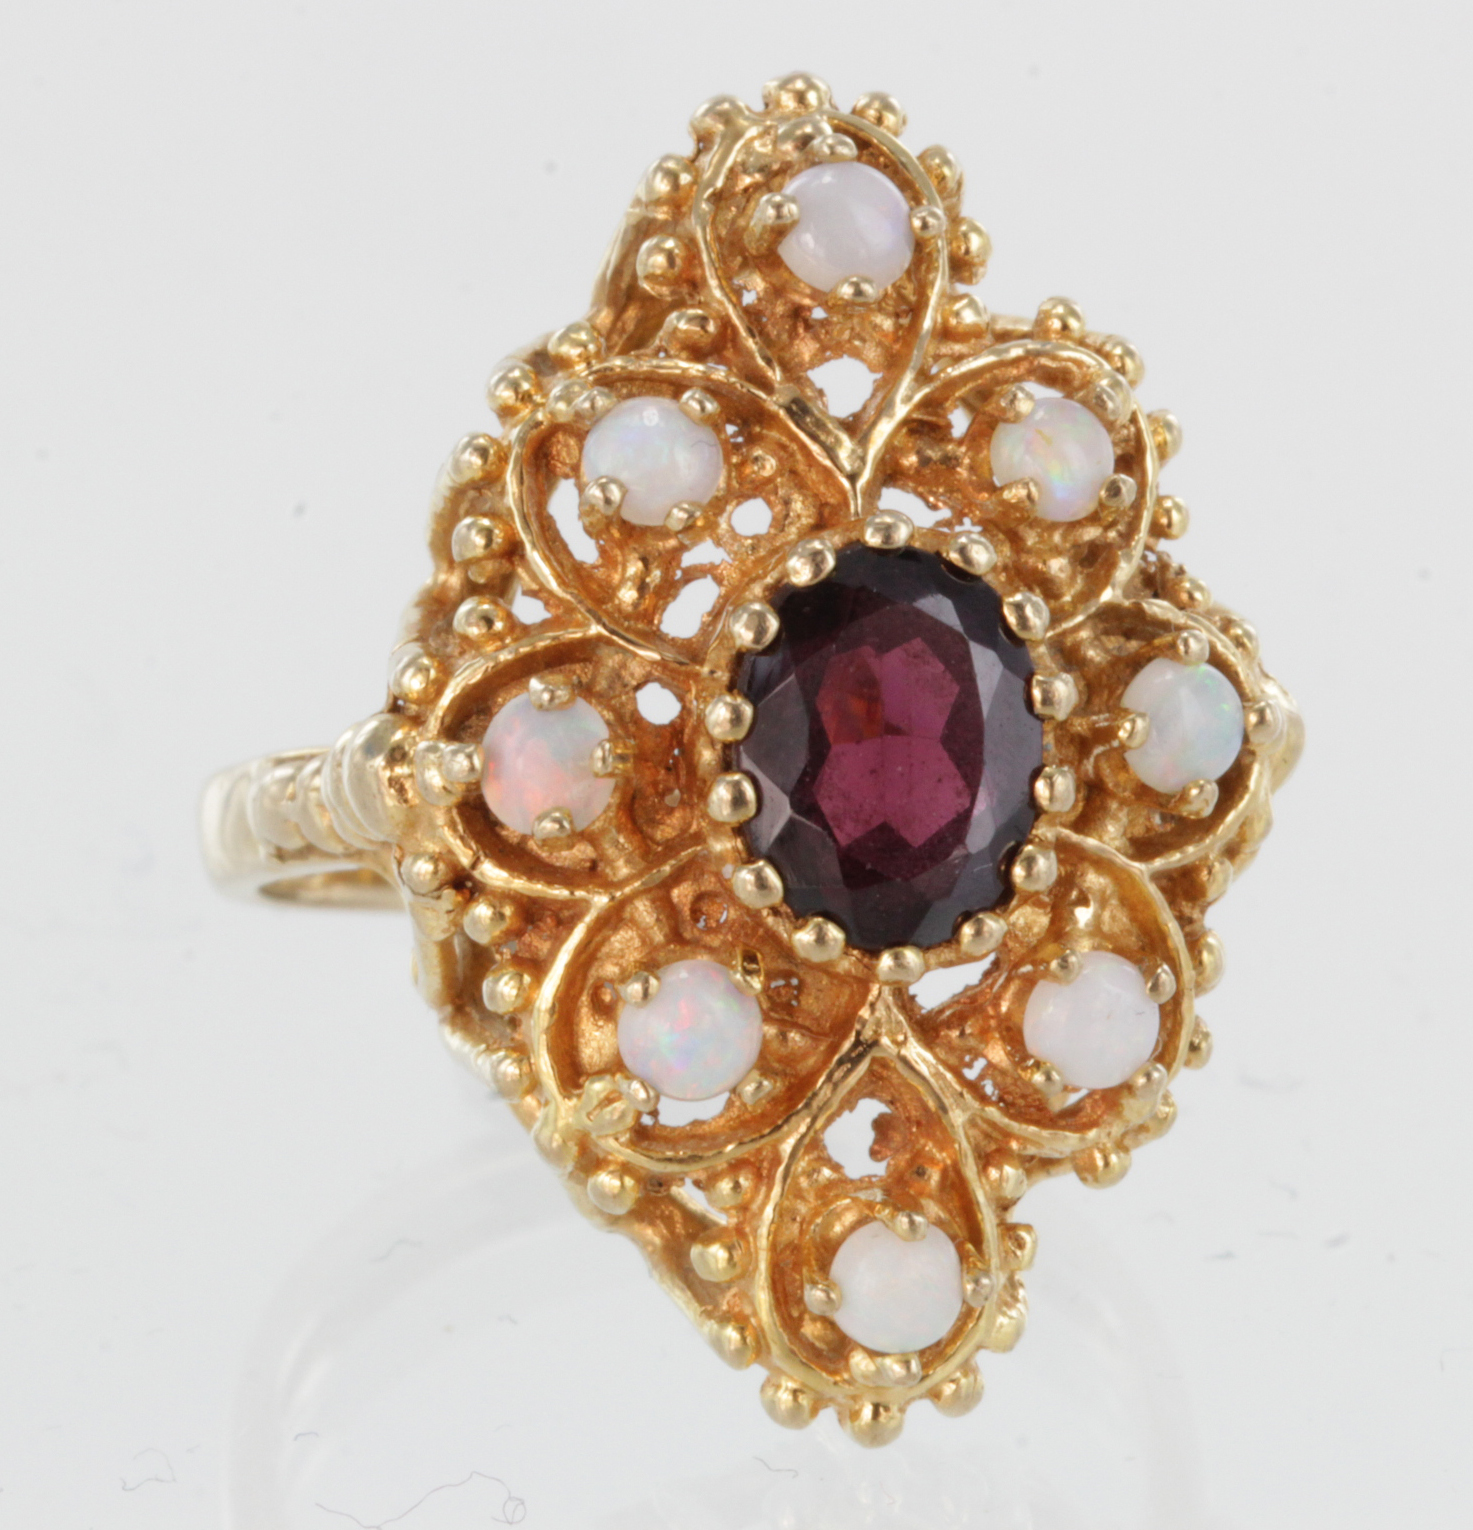 9ct Gold Opal and Garnet Ring size O weight 7.4g